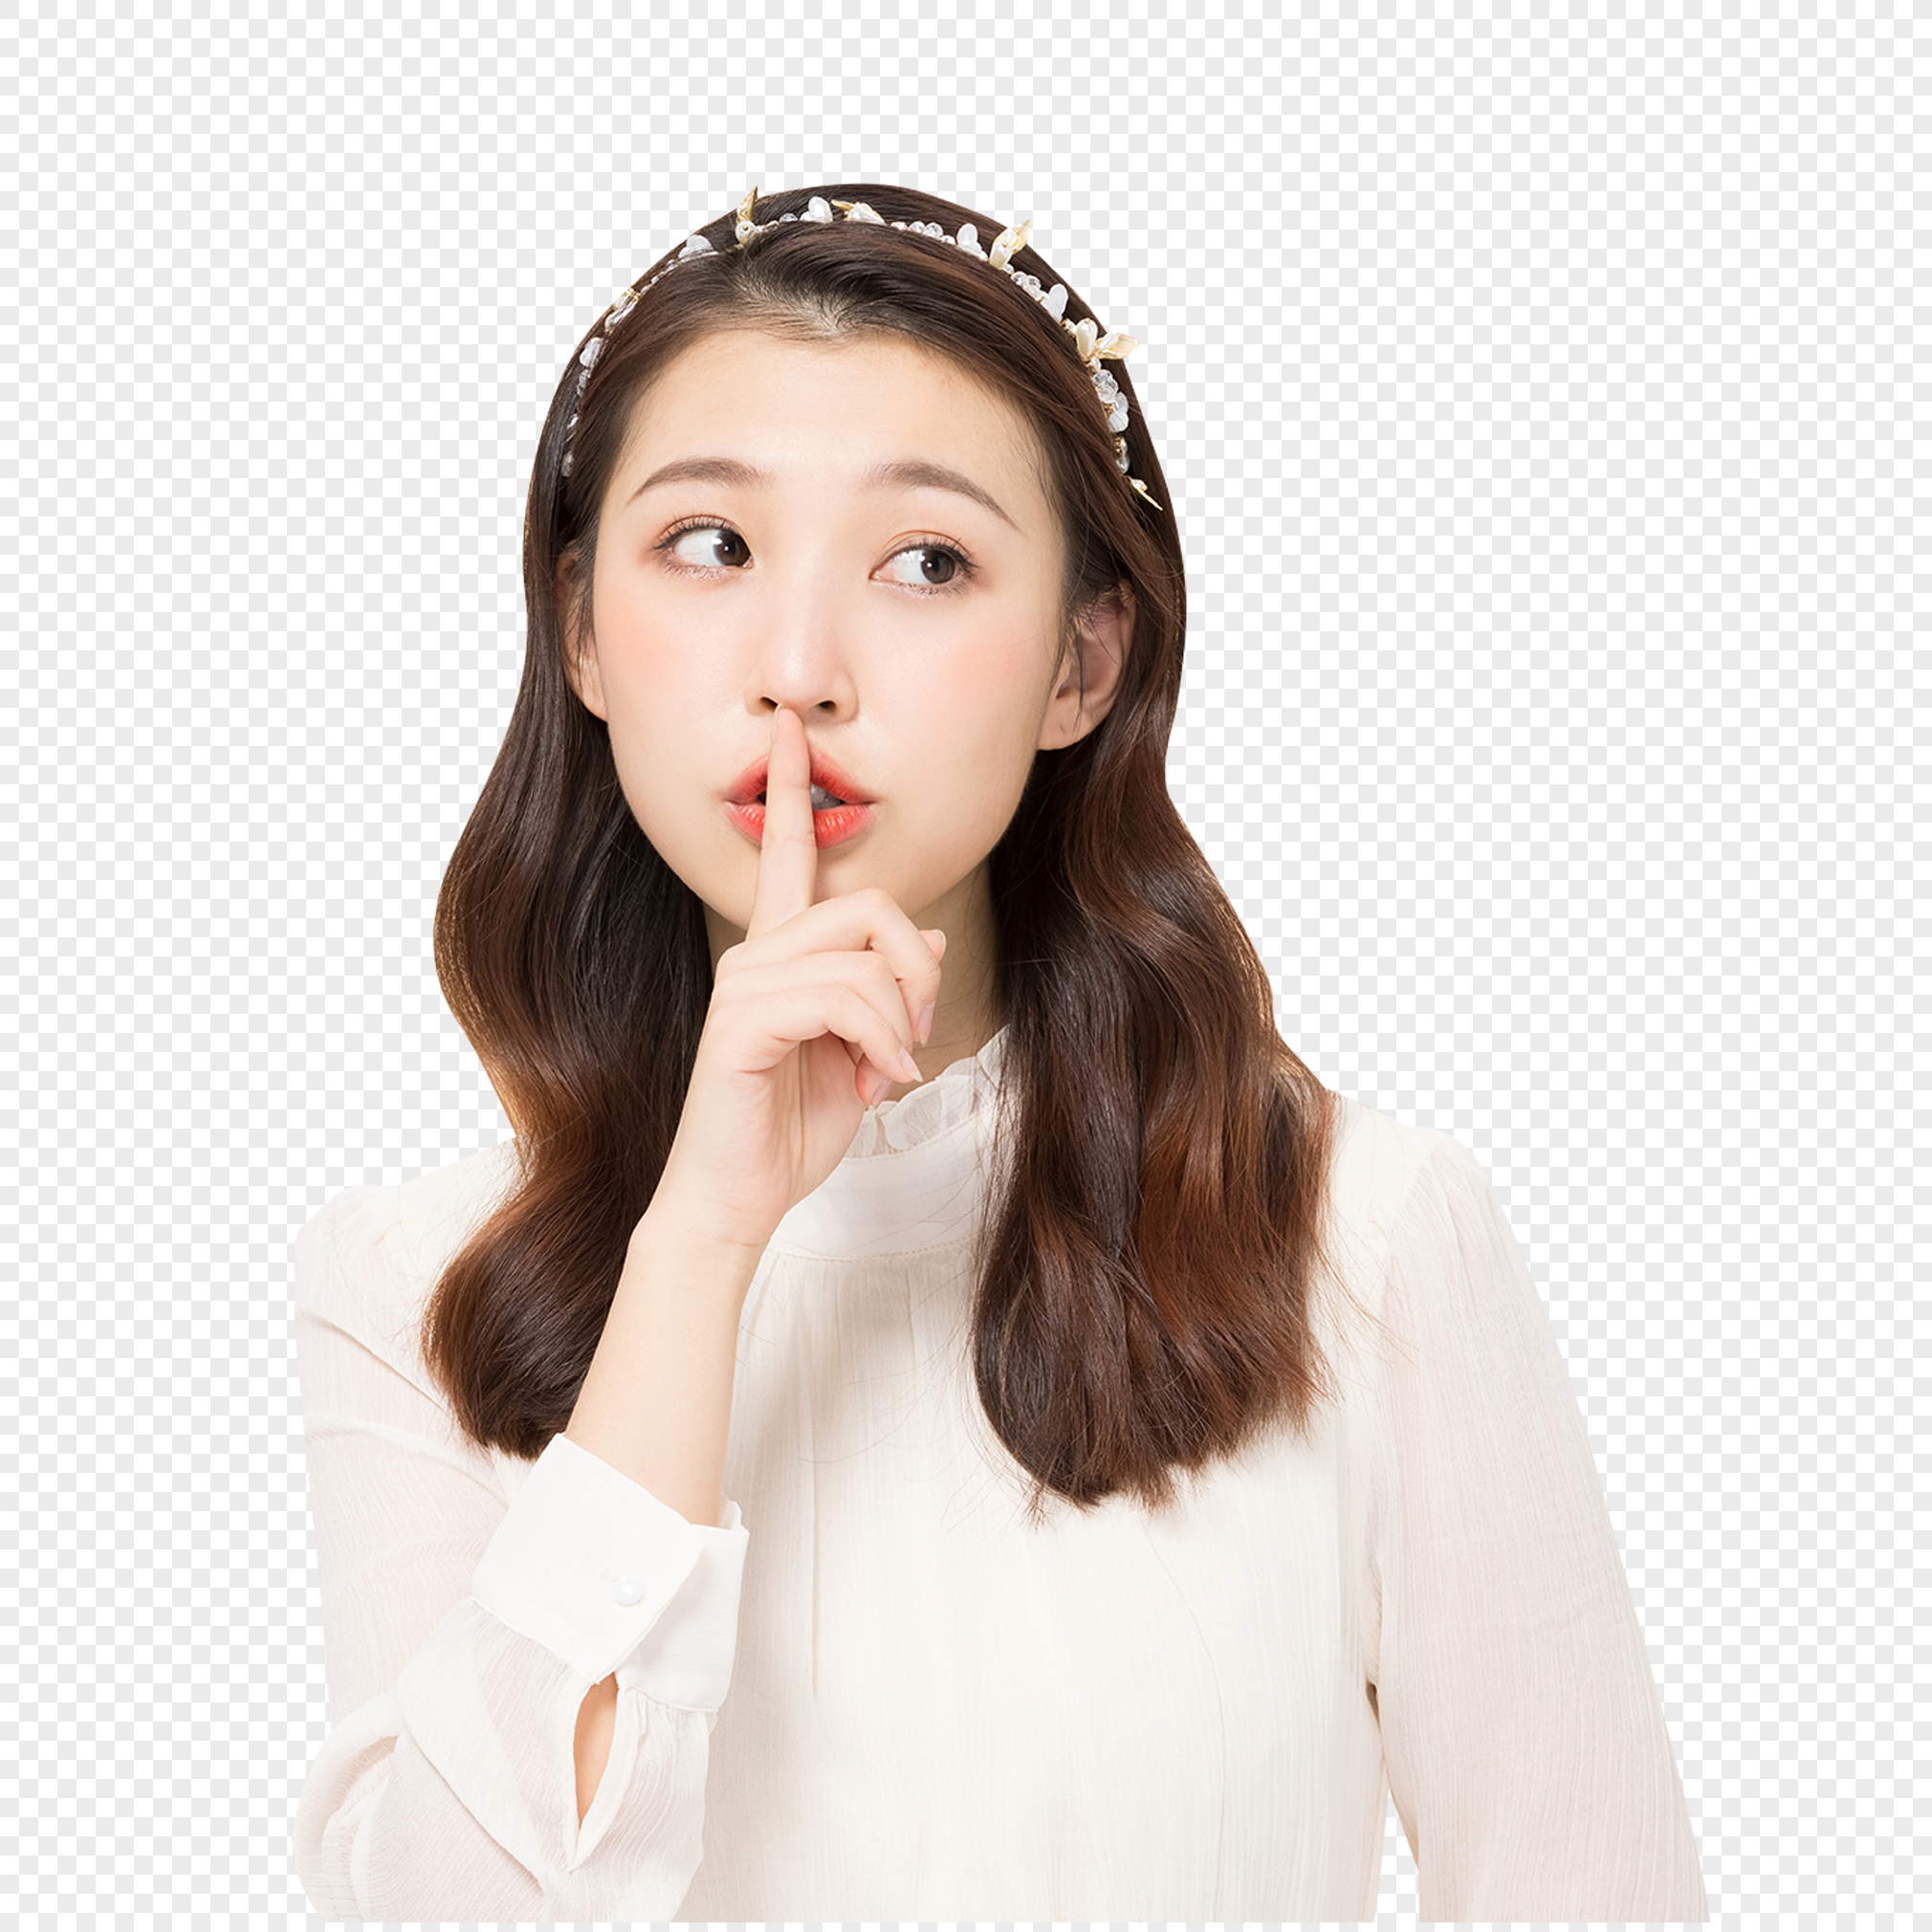 Korean Cute Girl PNG Images With Transparent Background